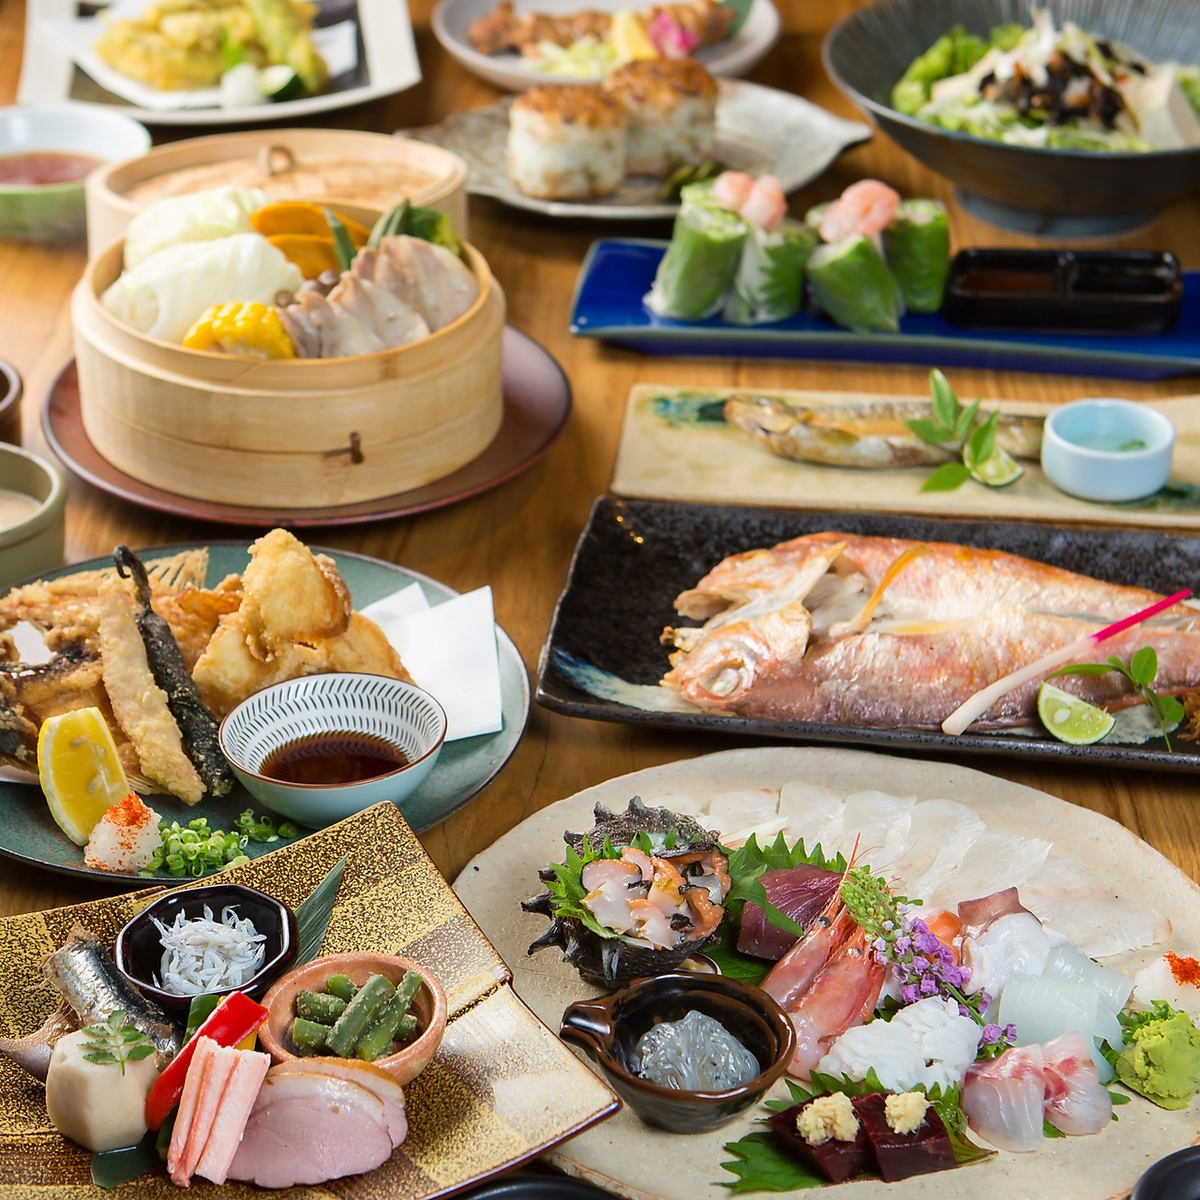 A once-in-a-lifetime menu where the best of the day is lined up.A restaurant with an excellent atmosphere where you can easily enjoy authentic Japanese cuisine